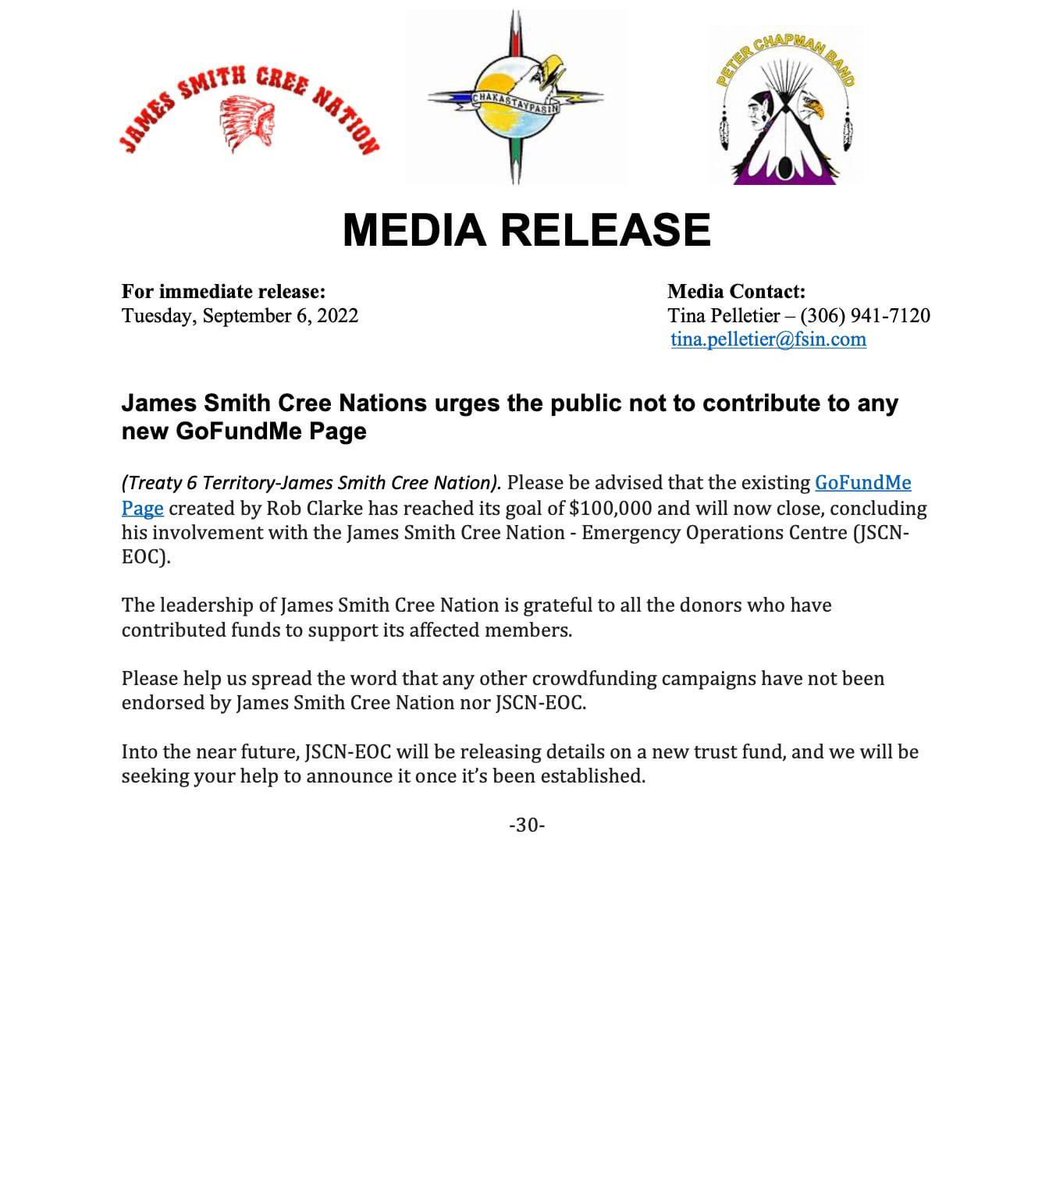 James Smith Cree Nation Urges the Public not to Contribute to Any New GoFundMe Page.